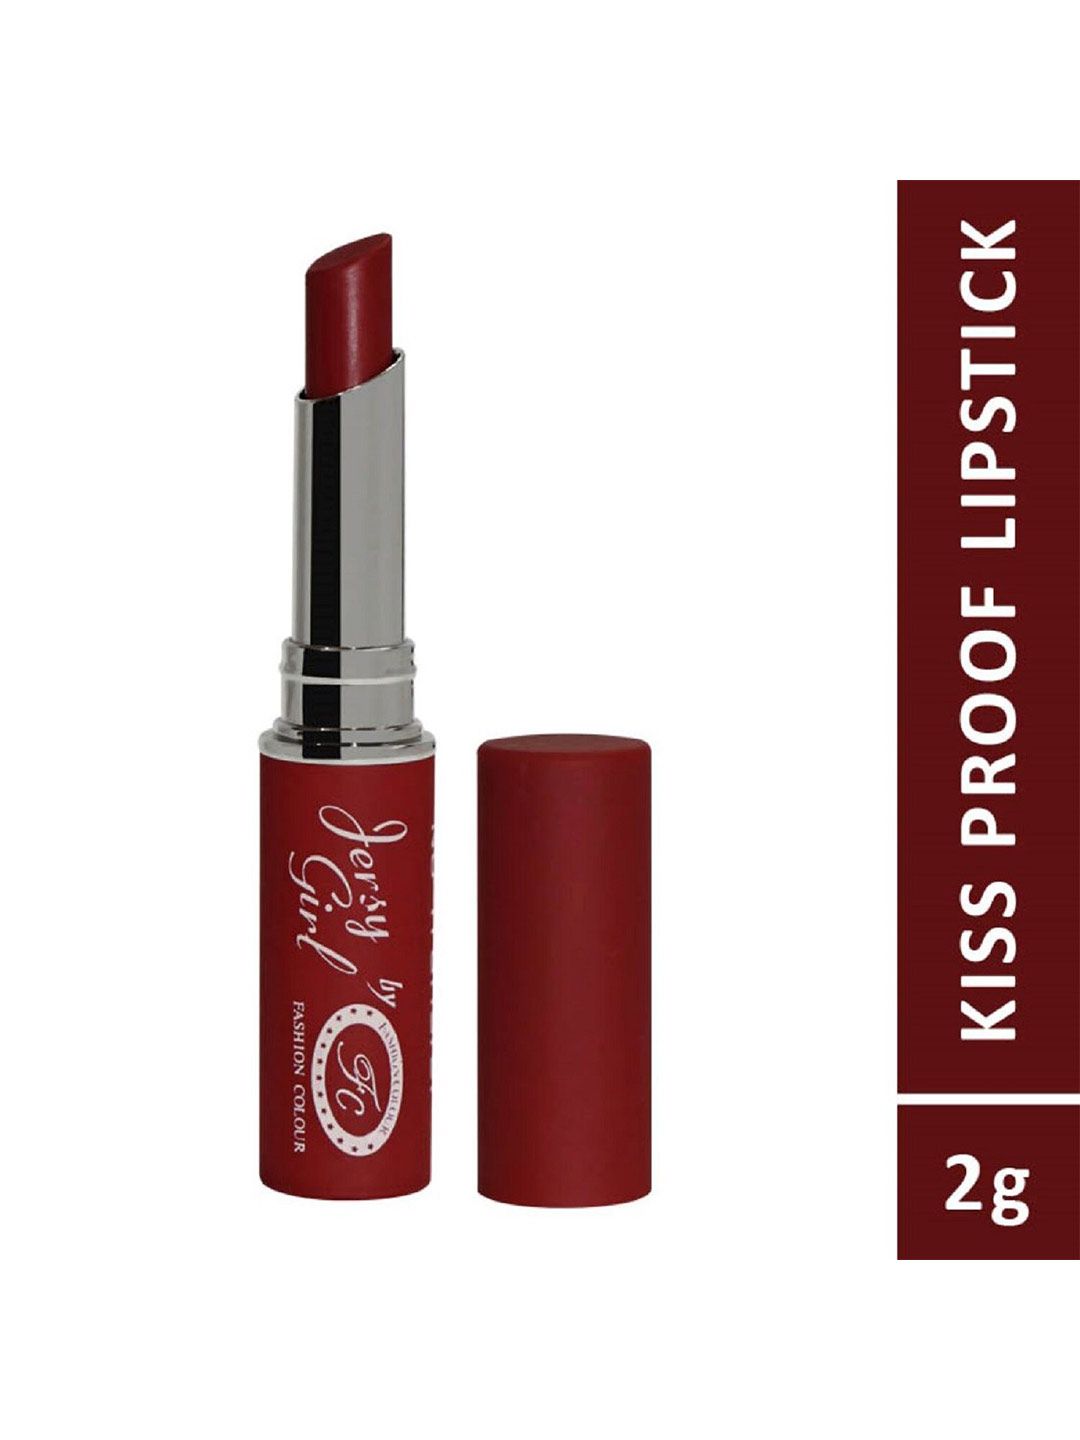 Fashion Colour Jersy Girl Kiss Proof No Transfer Matte Lipstick 2 g - Iced Amethyst 17 Price in India